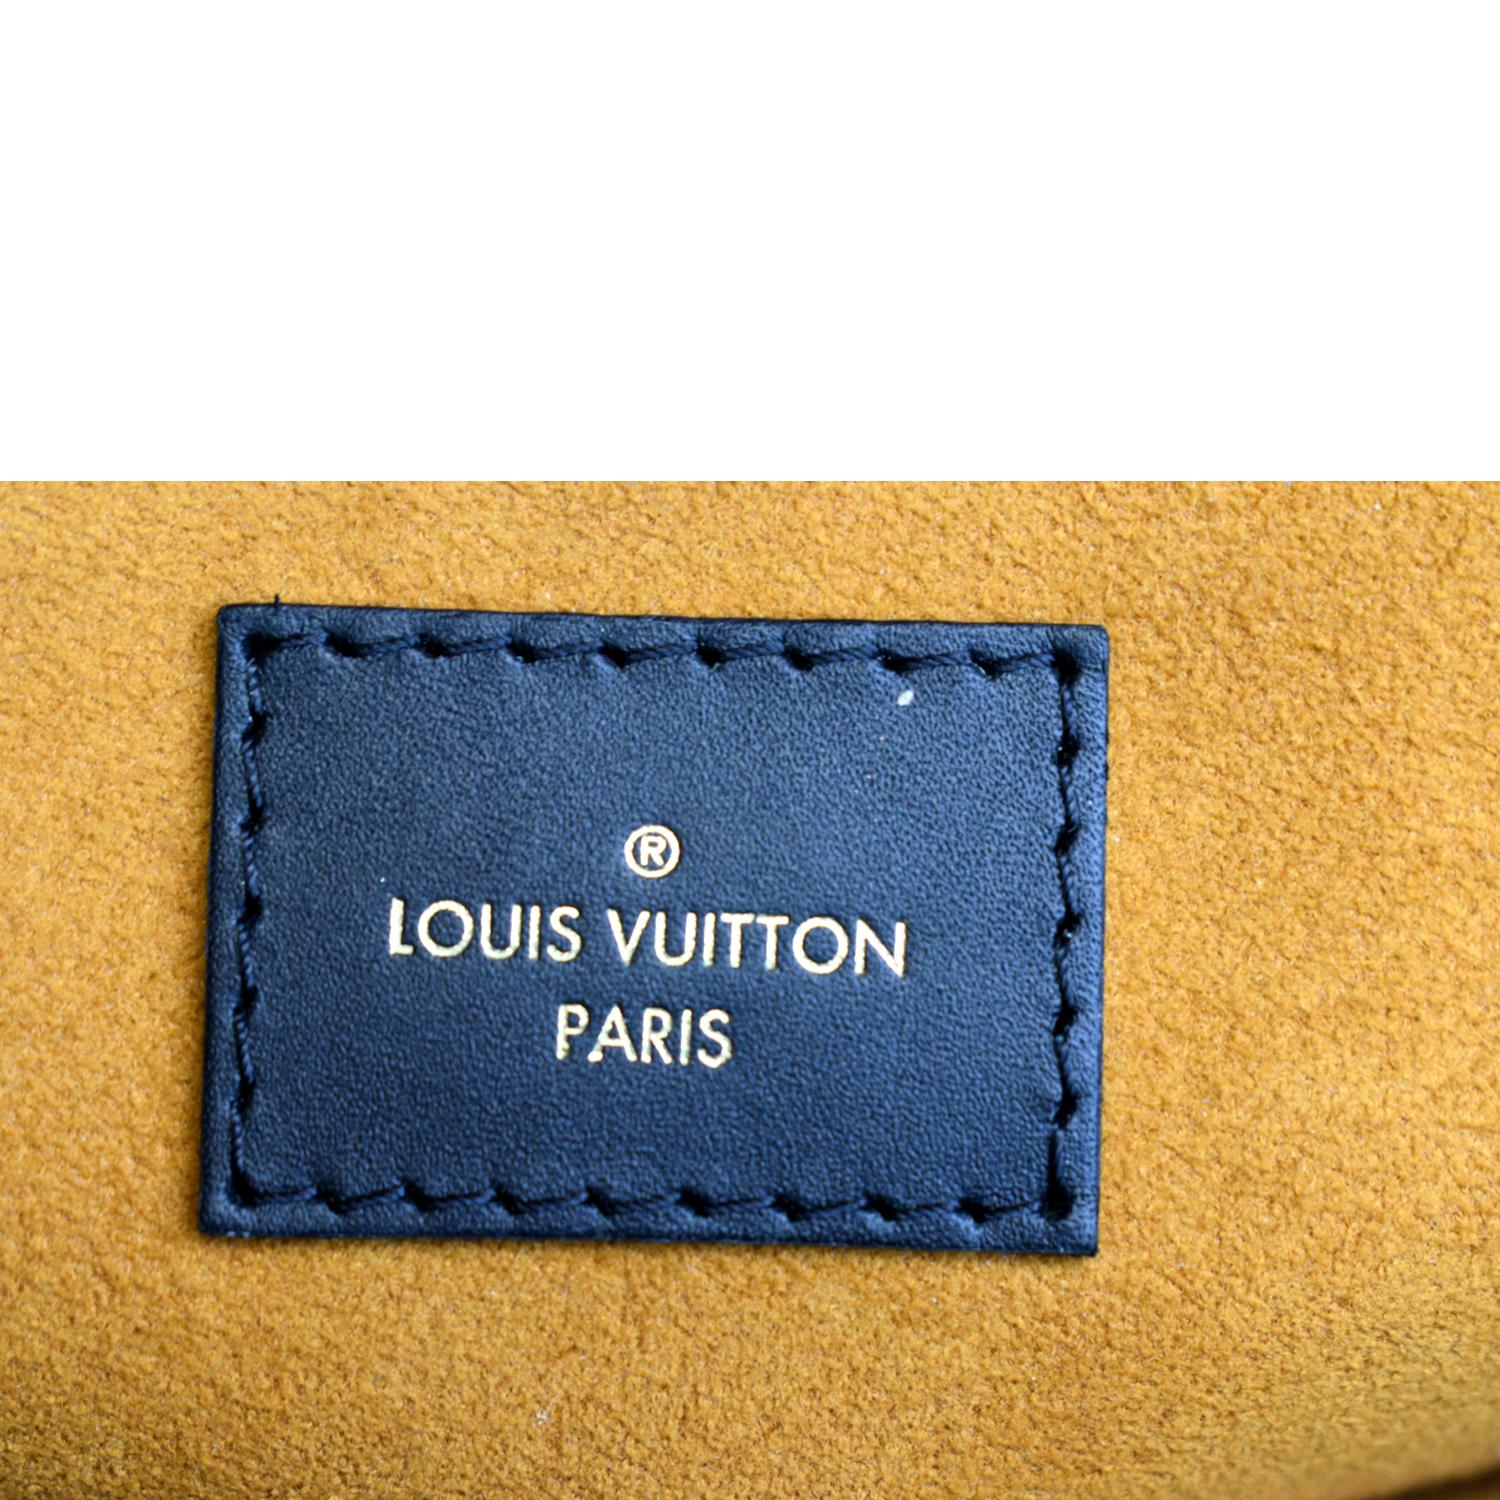 Is this bag fake or just well used? : r/Louisvuitton